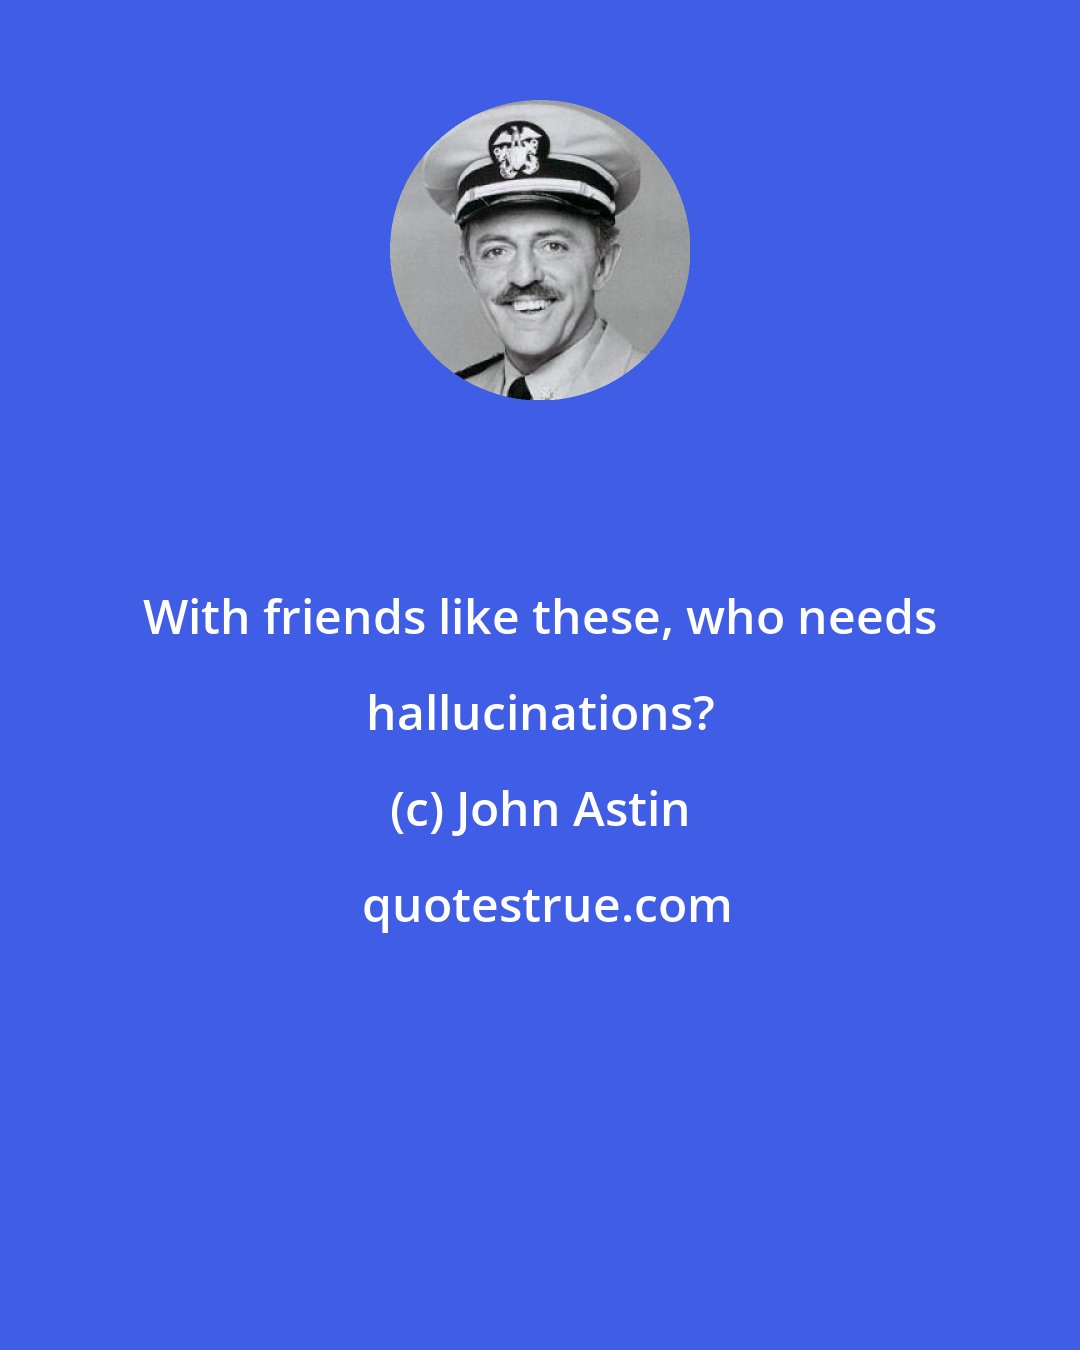 John Astin: With friends like these, who needs hallucinations?